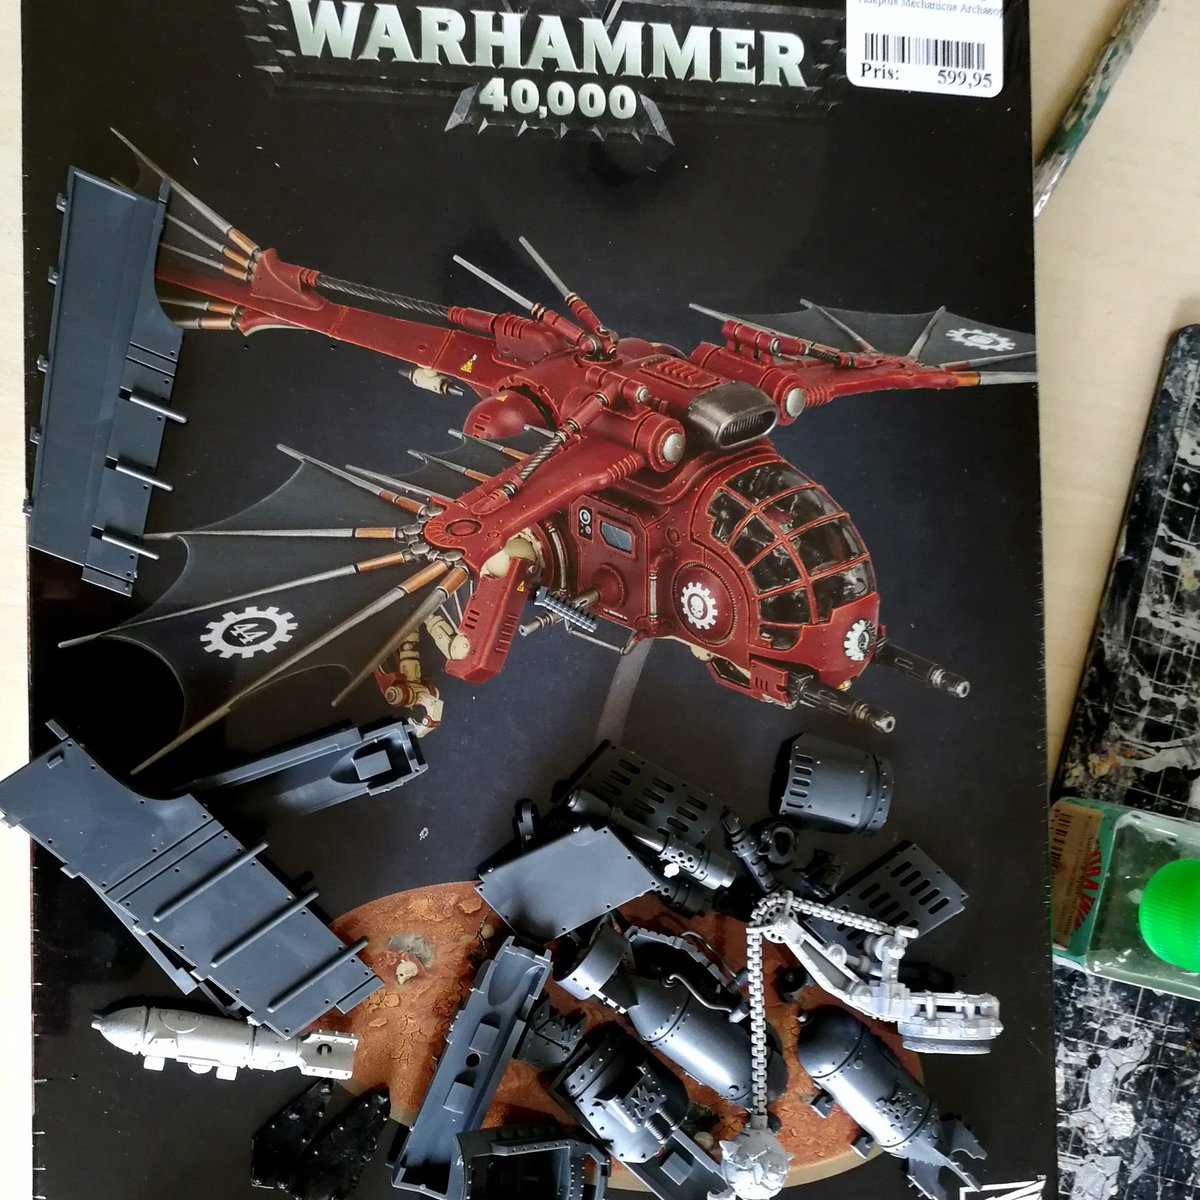 Project of the day: looting this!
Project of the month: painting it neon! 
Waaaaagh!

#warhammer40000 #new40k #wargaming #gamesworkshop #warhammercommunity #tabletopwargaming #paintingminiatures #orks #40korks #9thedition #waaagh #womeninwarhammer #paintingwarhammer